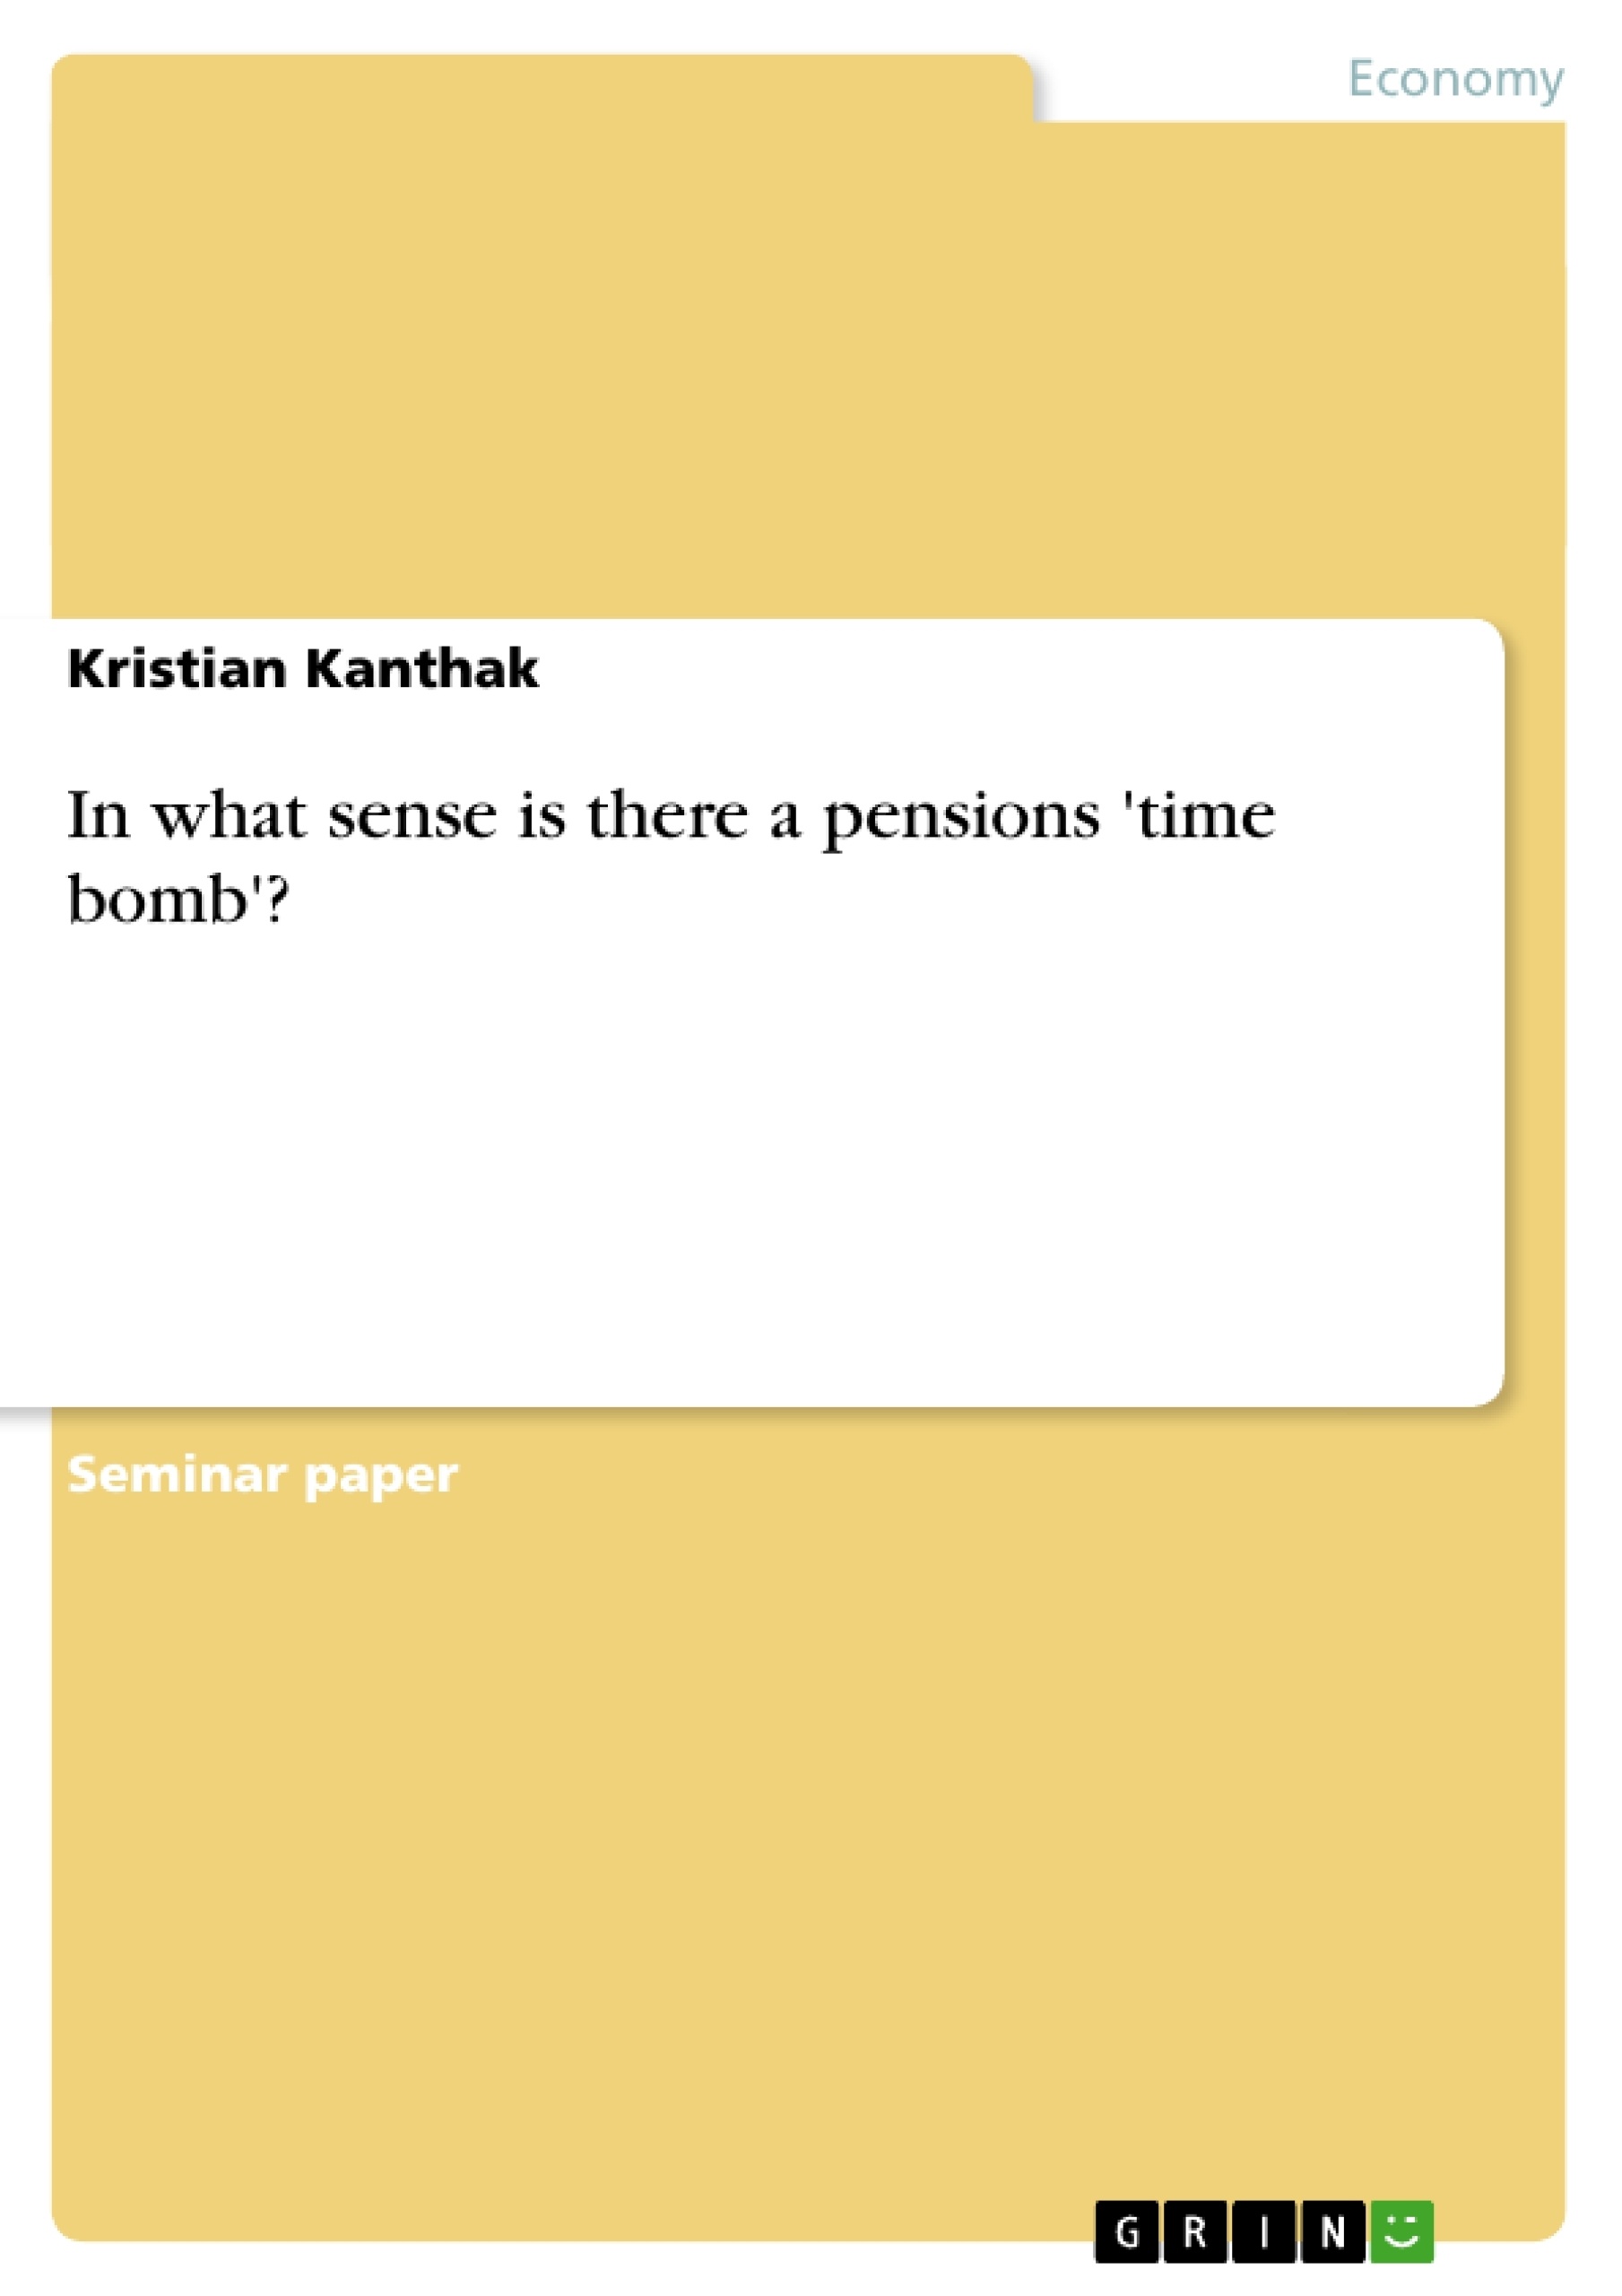 Title: In what sense is there a pensions 'time bomb'?